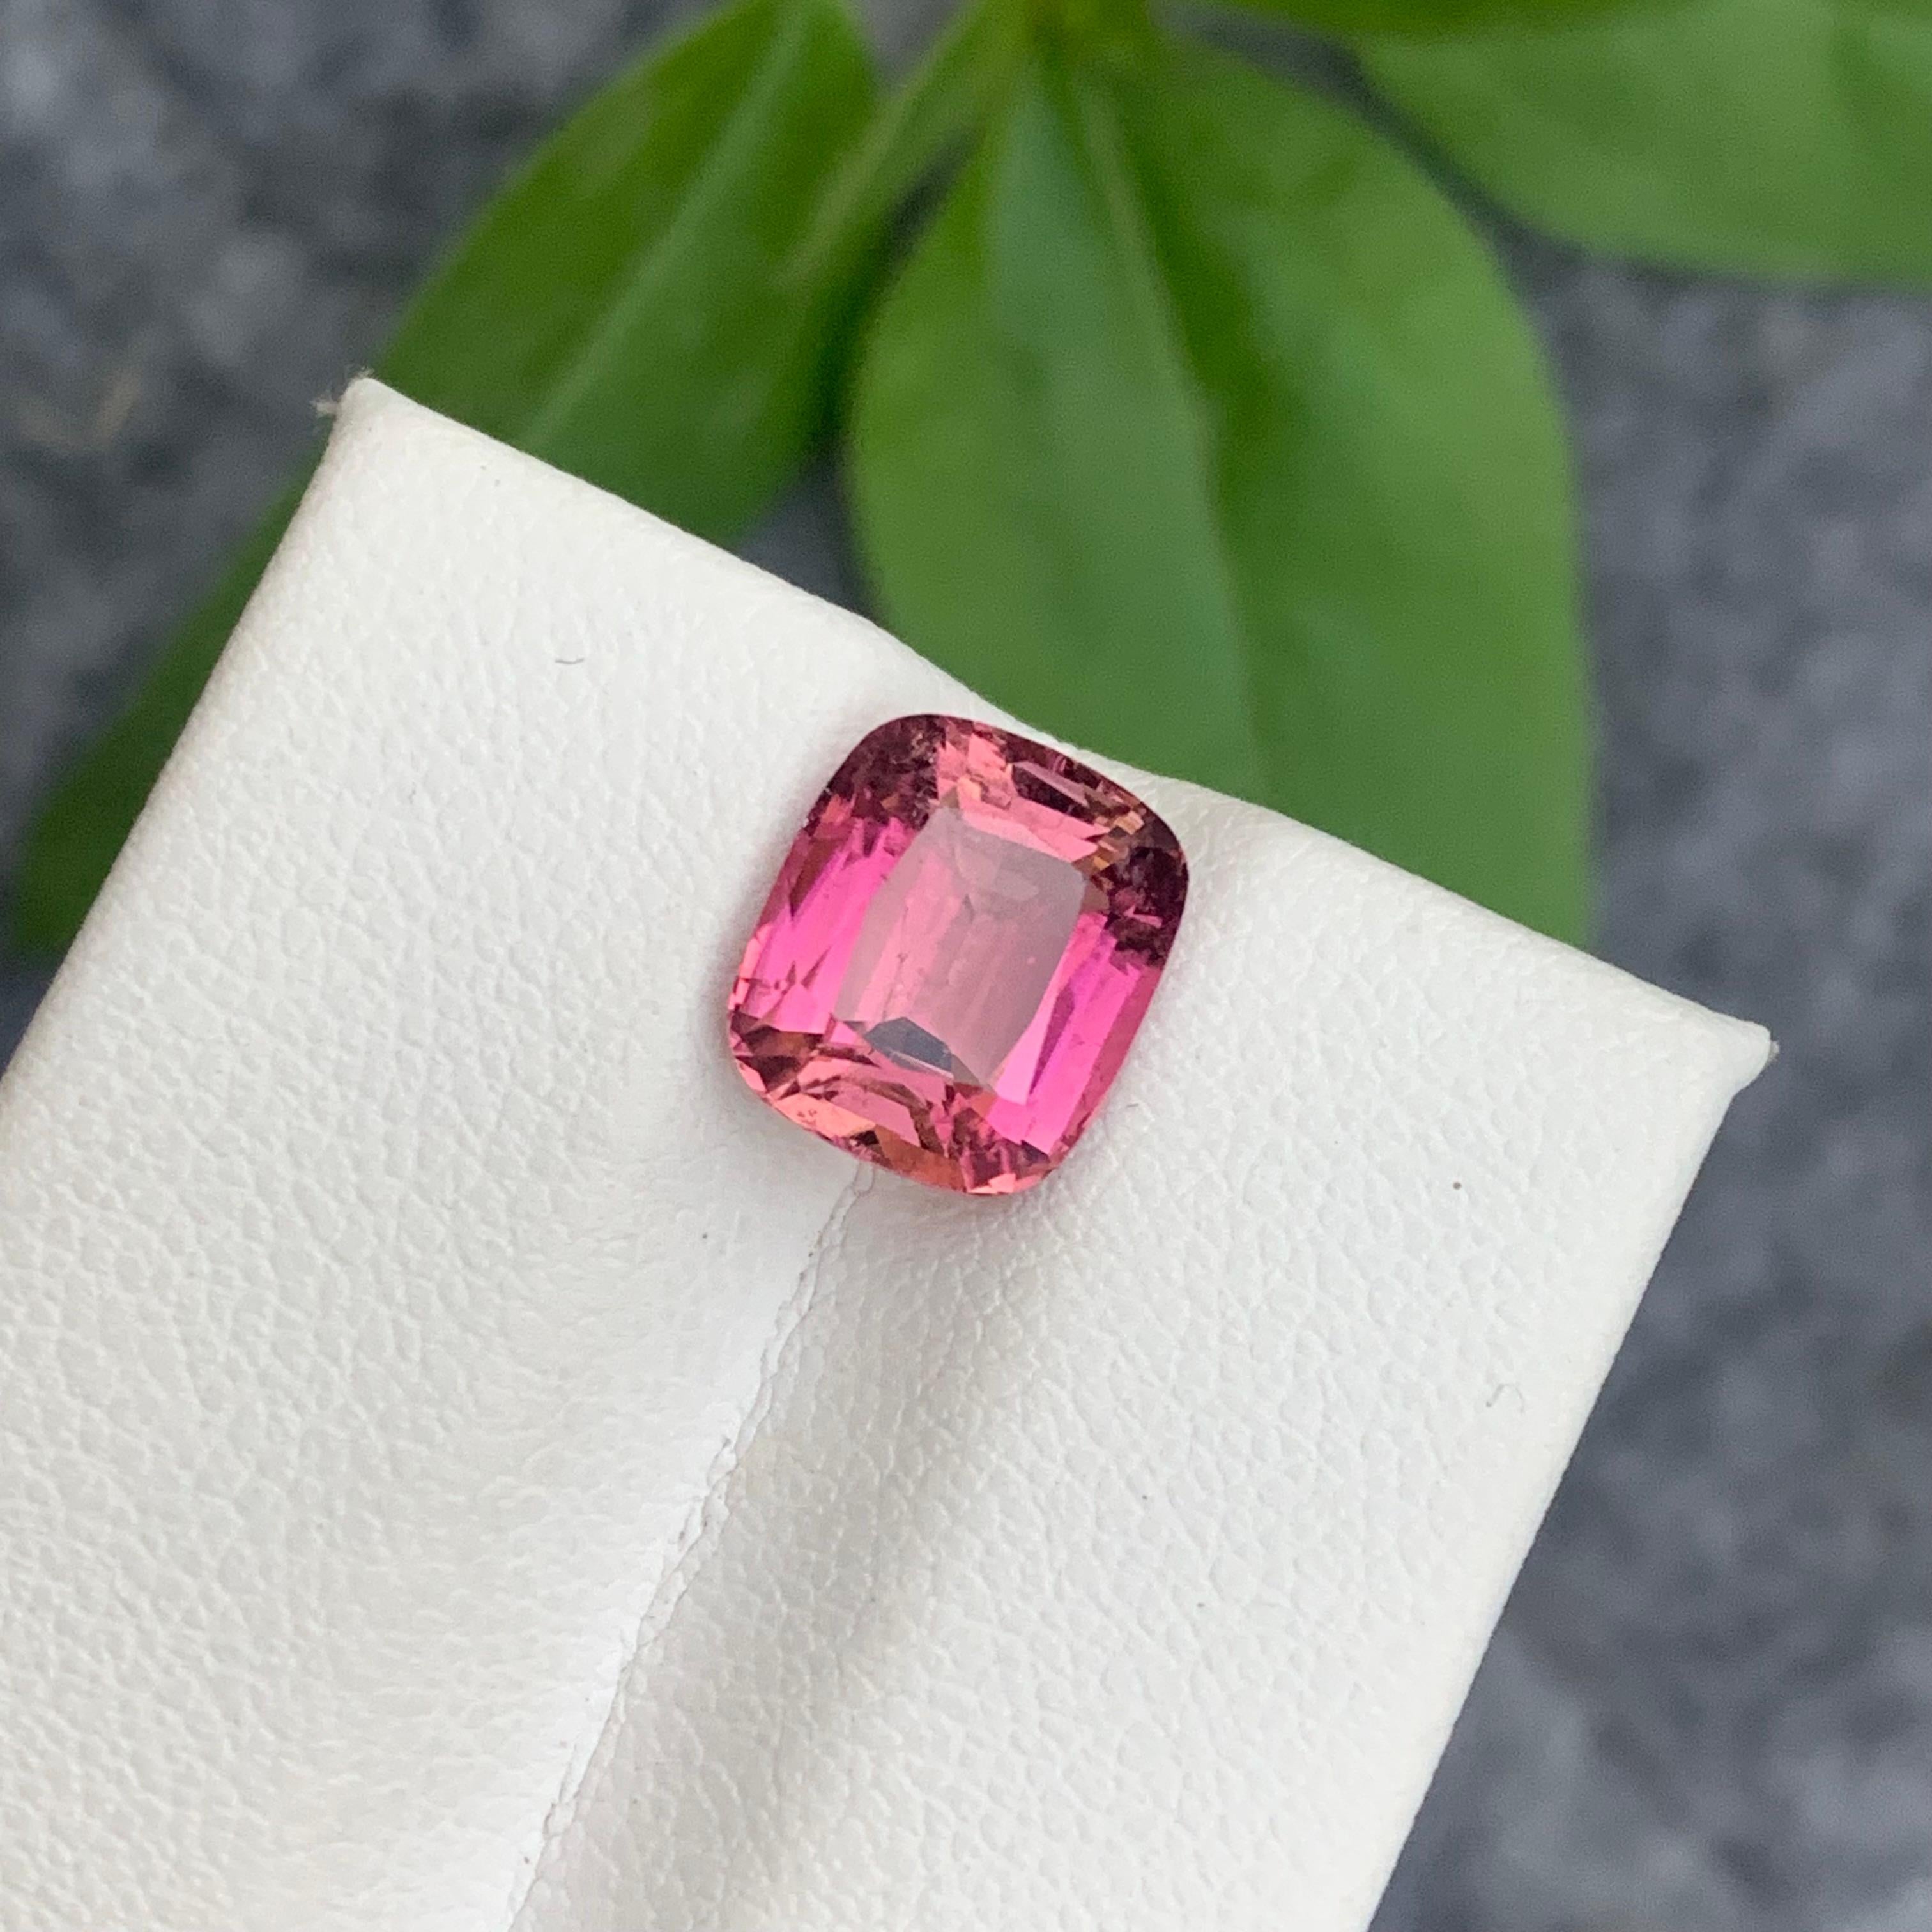 Gemstone Type : Tourmaline
Weight : 3.65 Carats
Dimensions : 9.7x8.2x5.9 Mm
Origin : Kunar Afghanistan
Clarity : SI
Shape: Cushion
Color: Pink
Certificate: On Demand
Basically, mint tourmalines are tourmalines with pastel hues of light green to